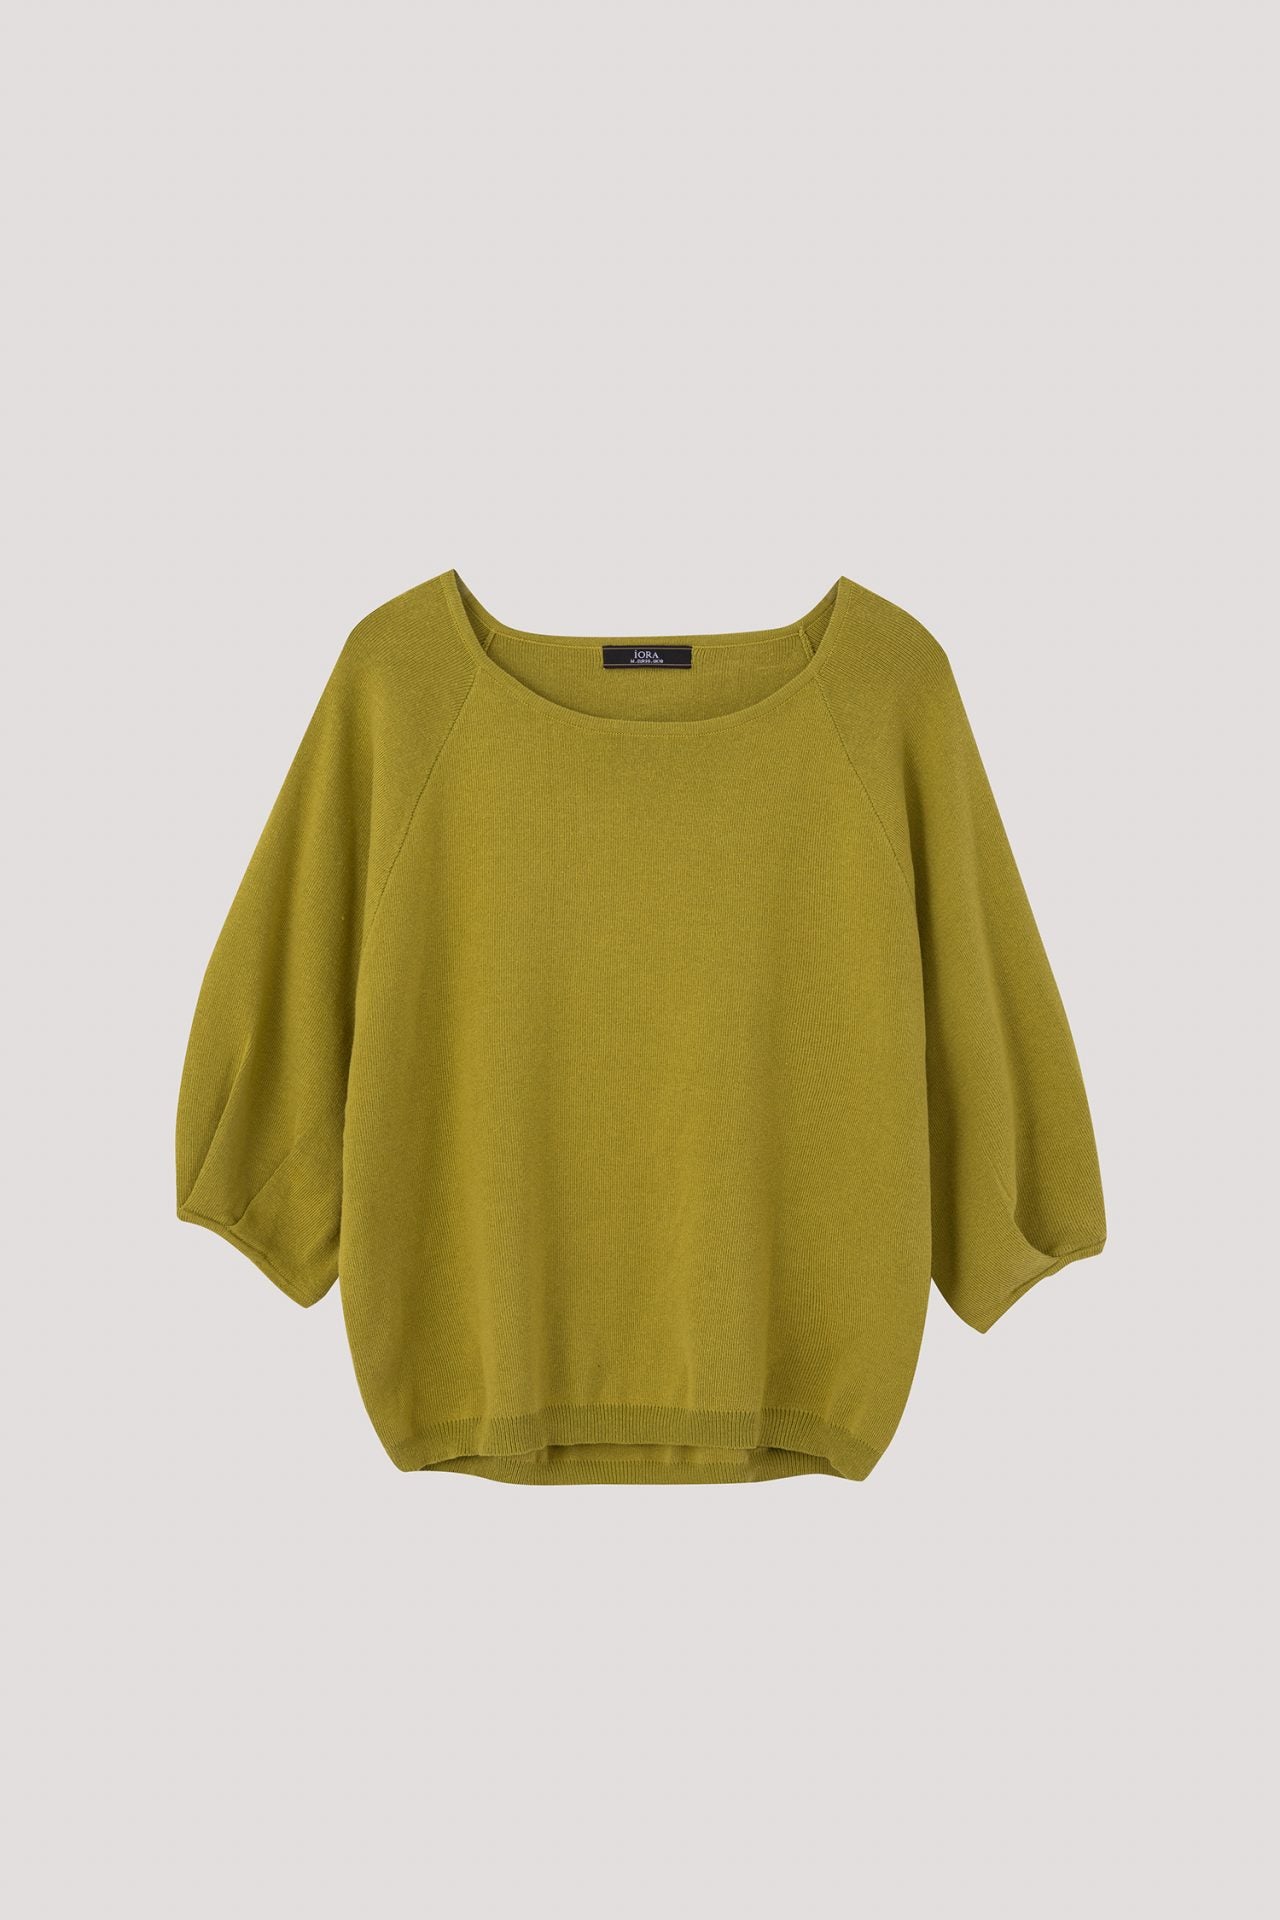 AKB 9646 PUFFED SLEEVES KNIT BLOUSE OLIVE